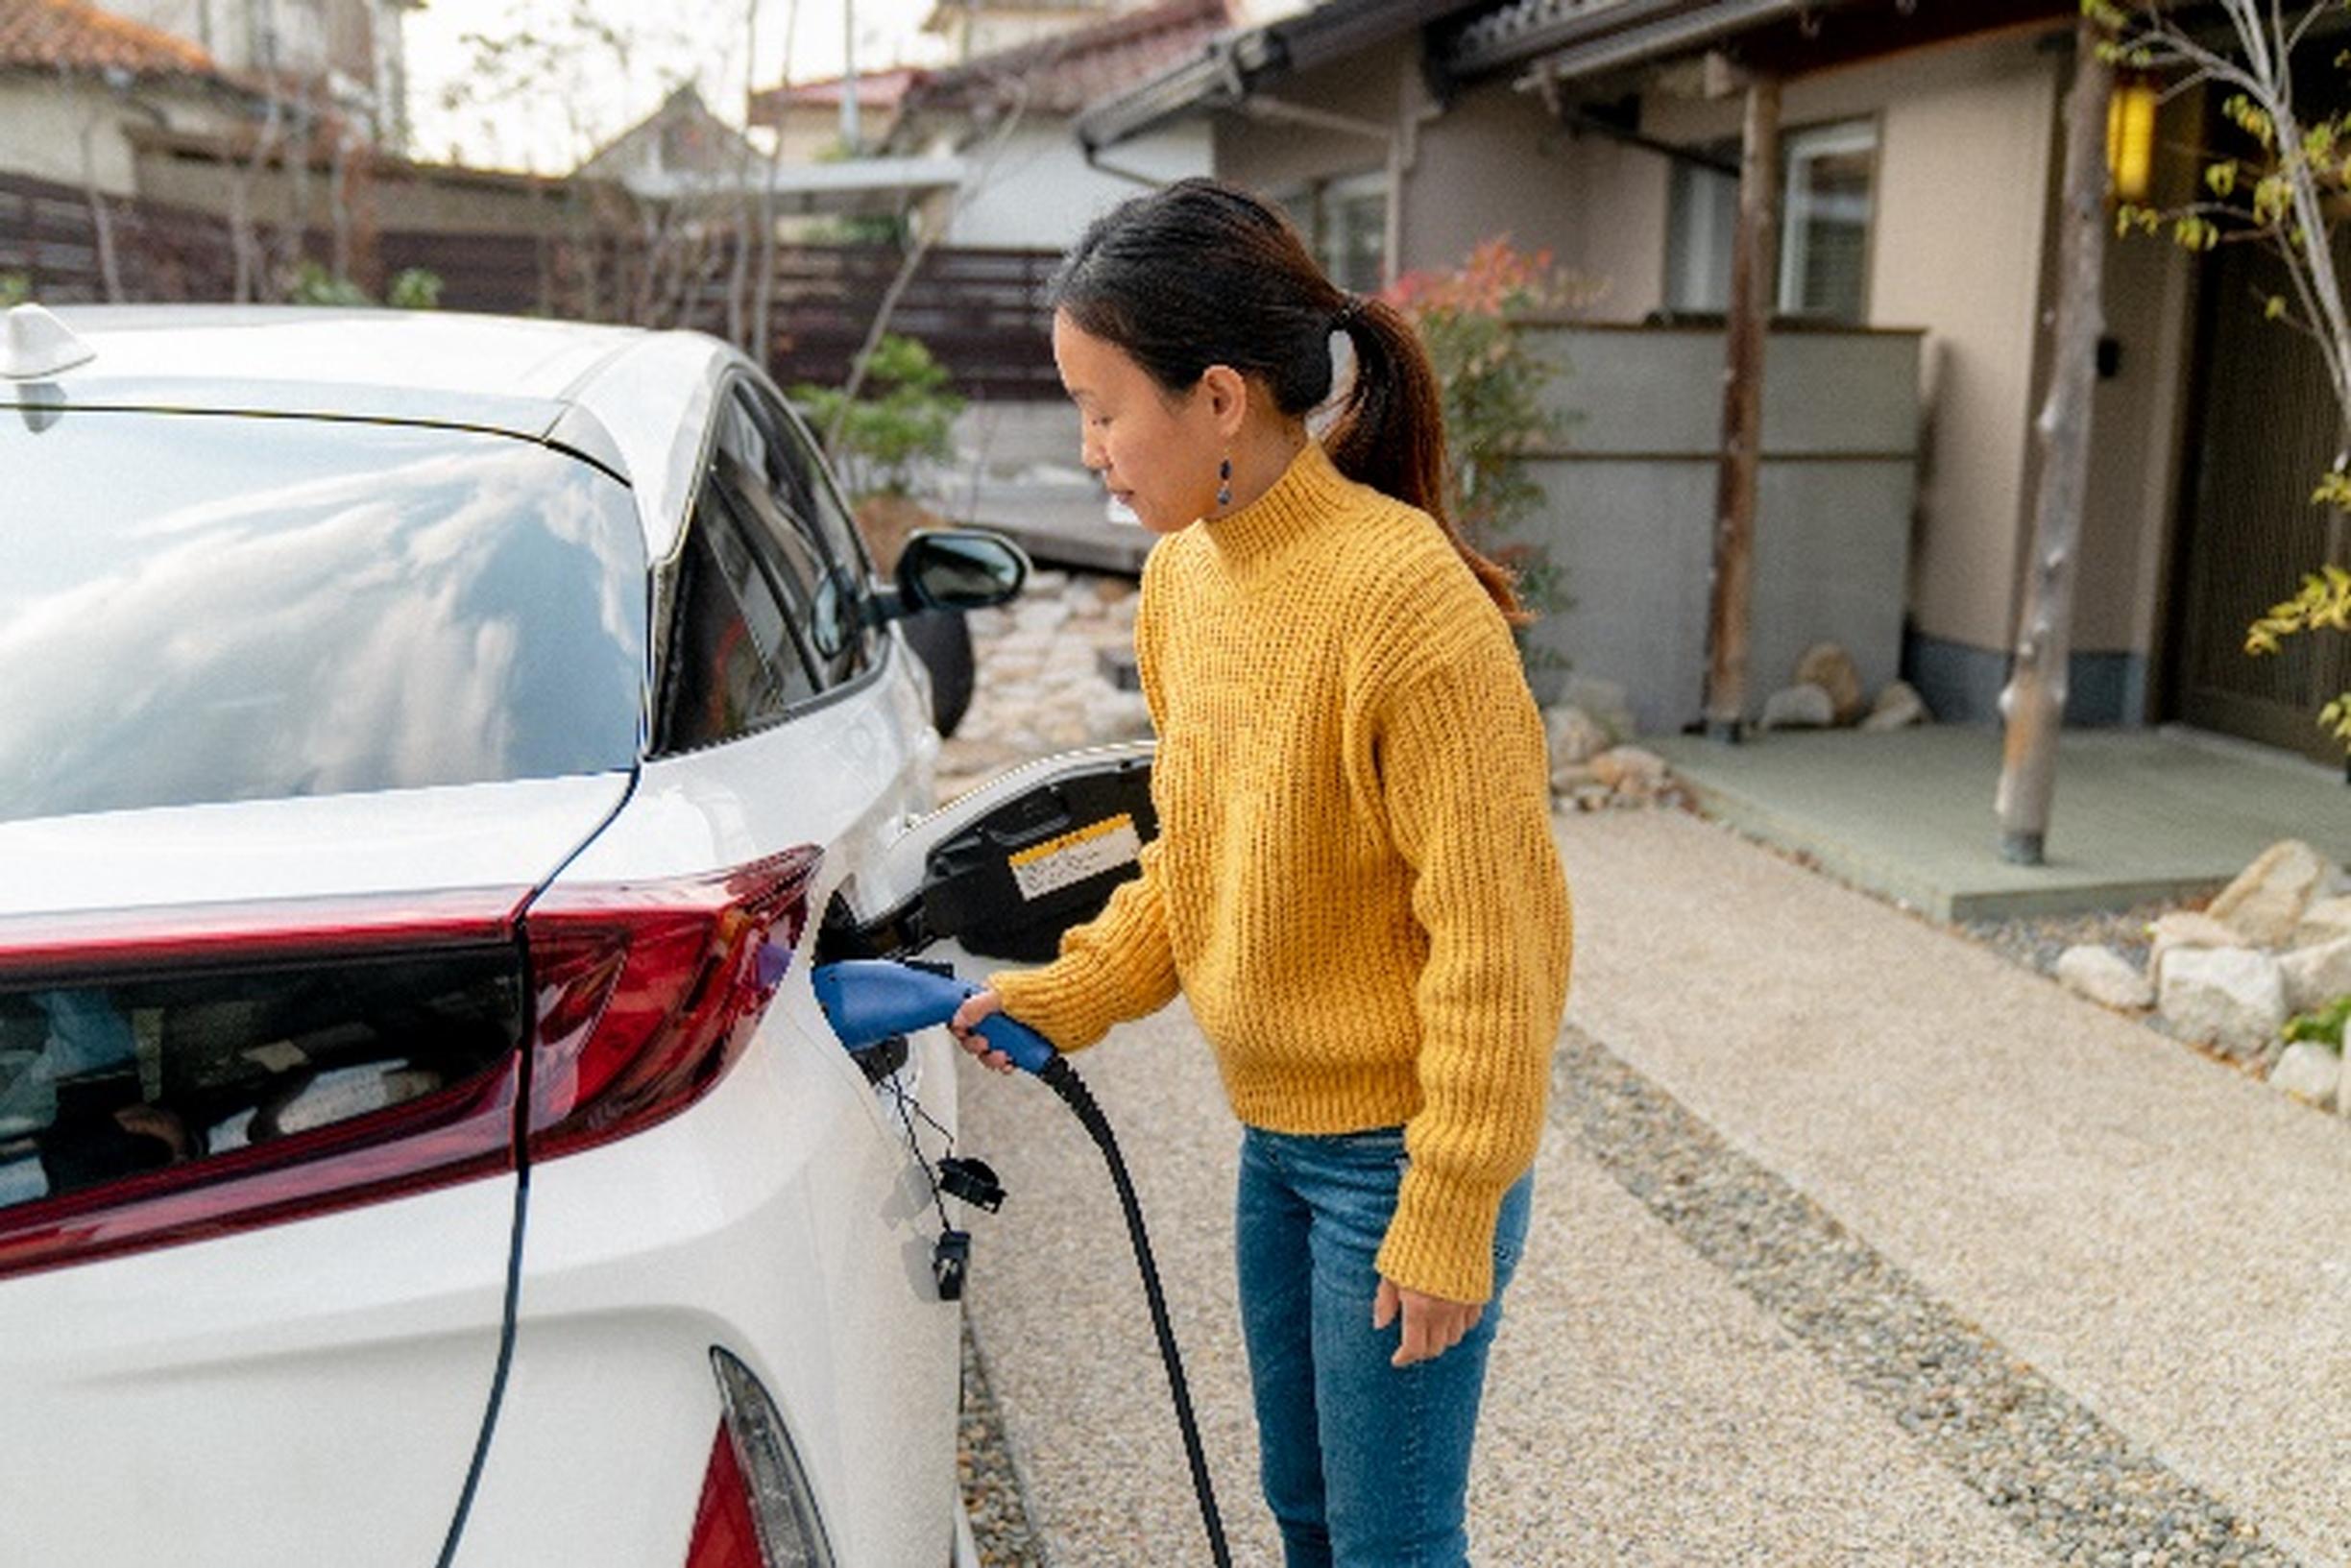 The majority of EV marketing is currently focused on technology, despite just 12% of women saying that they prioritise this when buying a car